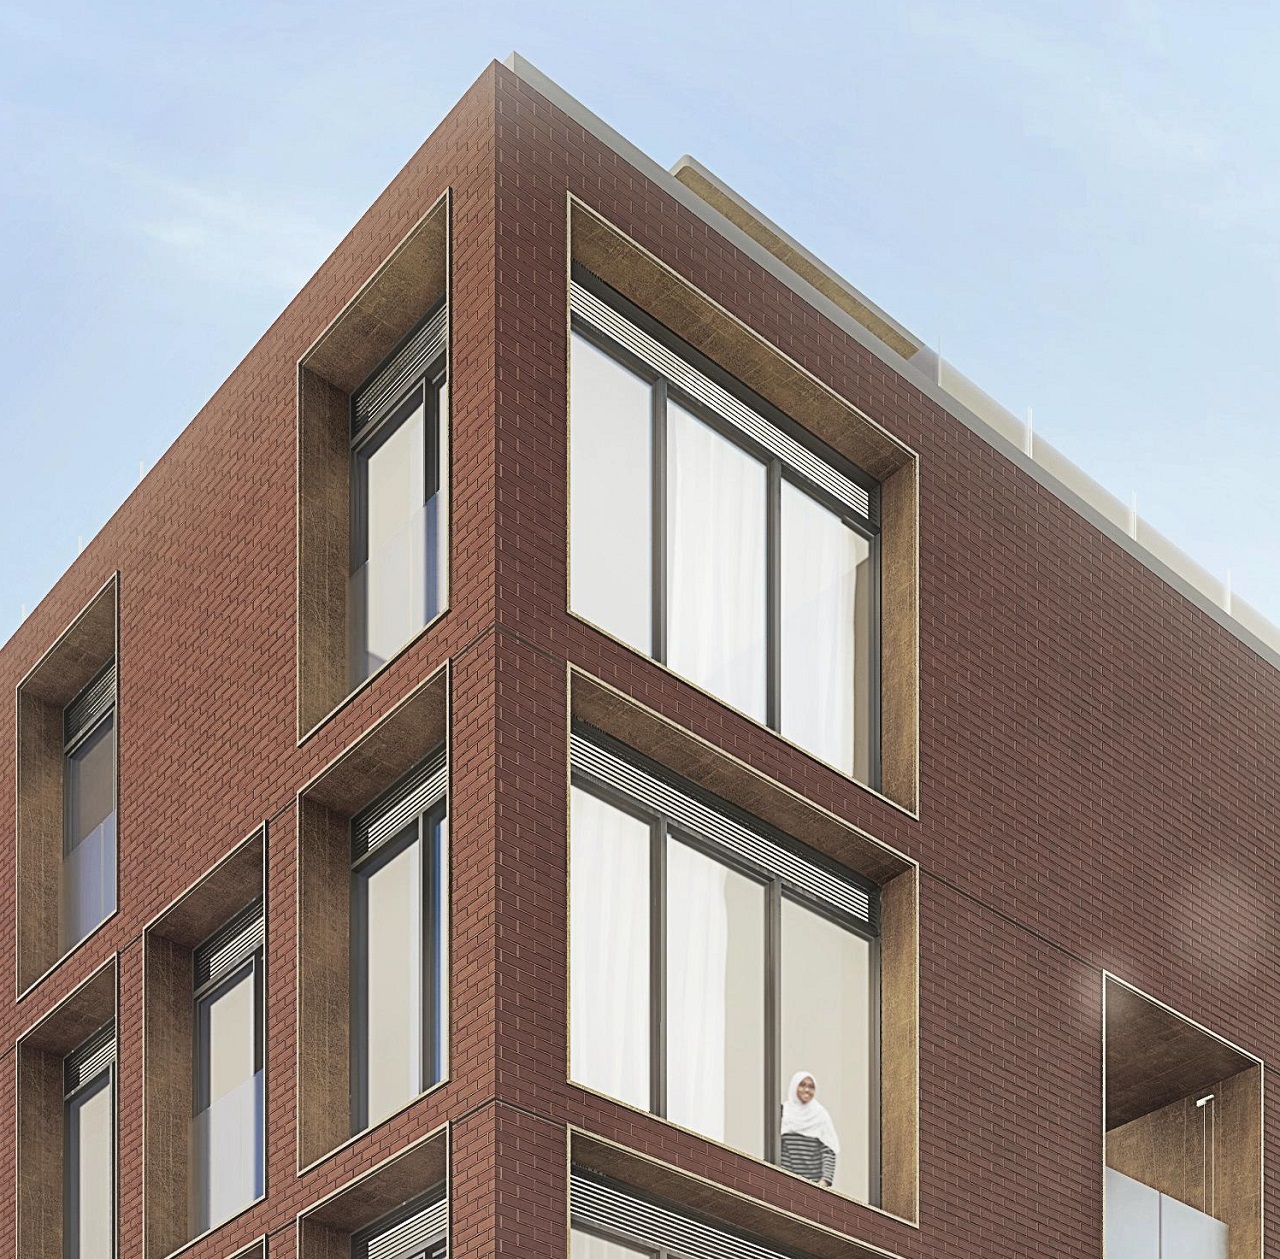 Exterior rendering of The Brickhouse on Gladstone Condos close up of building facade.